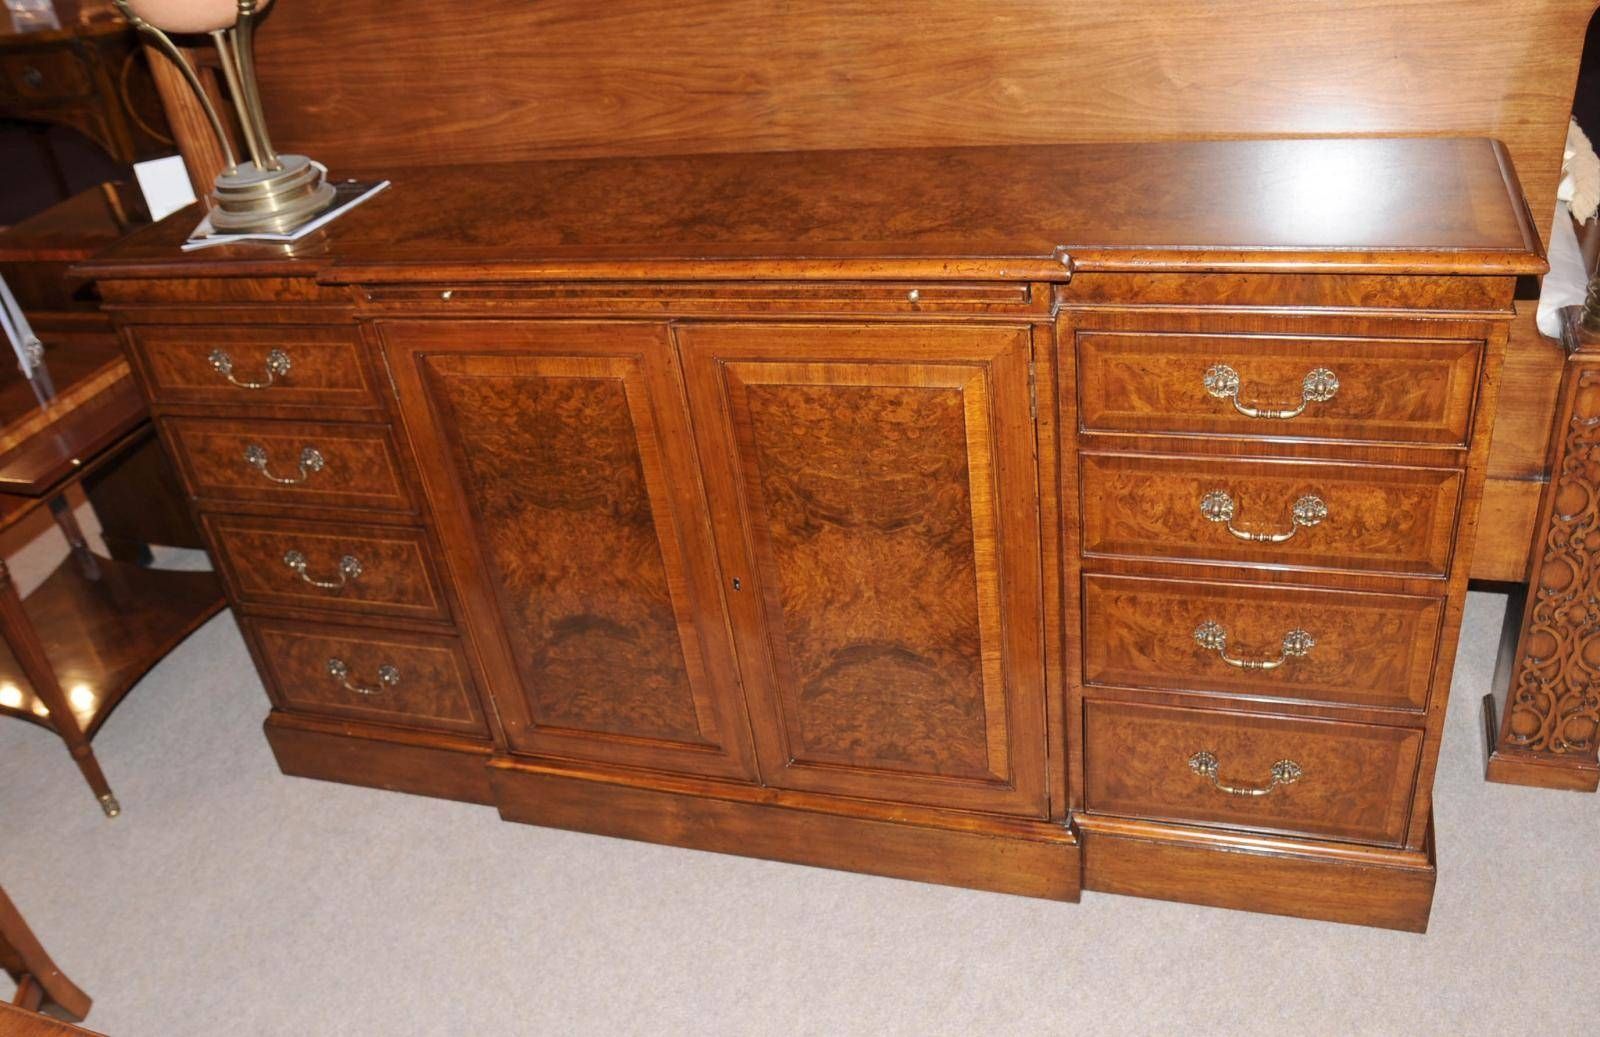 Edwardian Walnut Sideboard Buffet Server Dining Furniture | Ebay Throughout Most Recent Sideboard Buffet Servers (View 3 of 15)